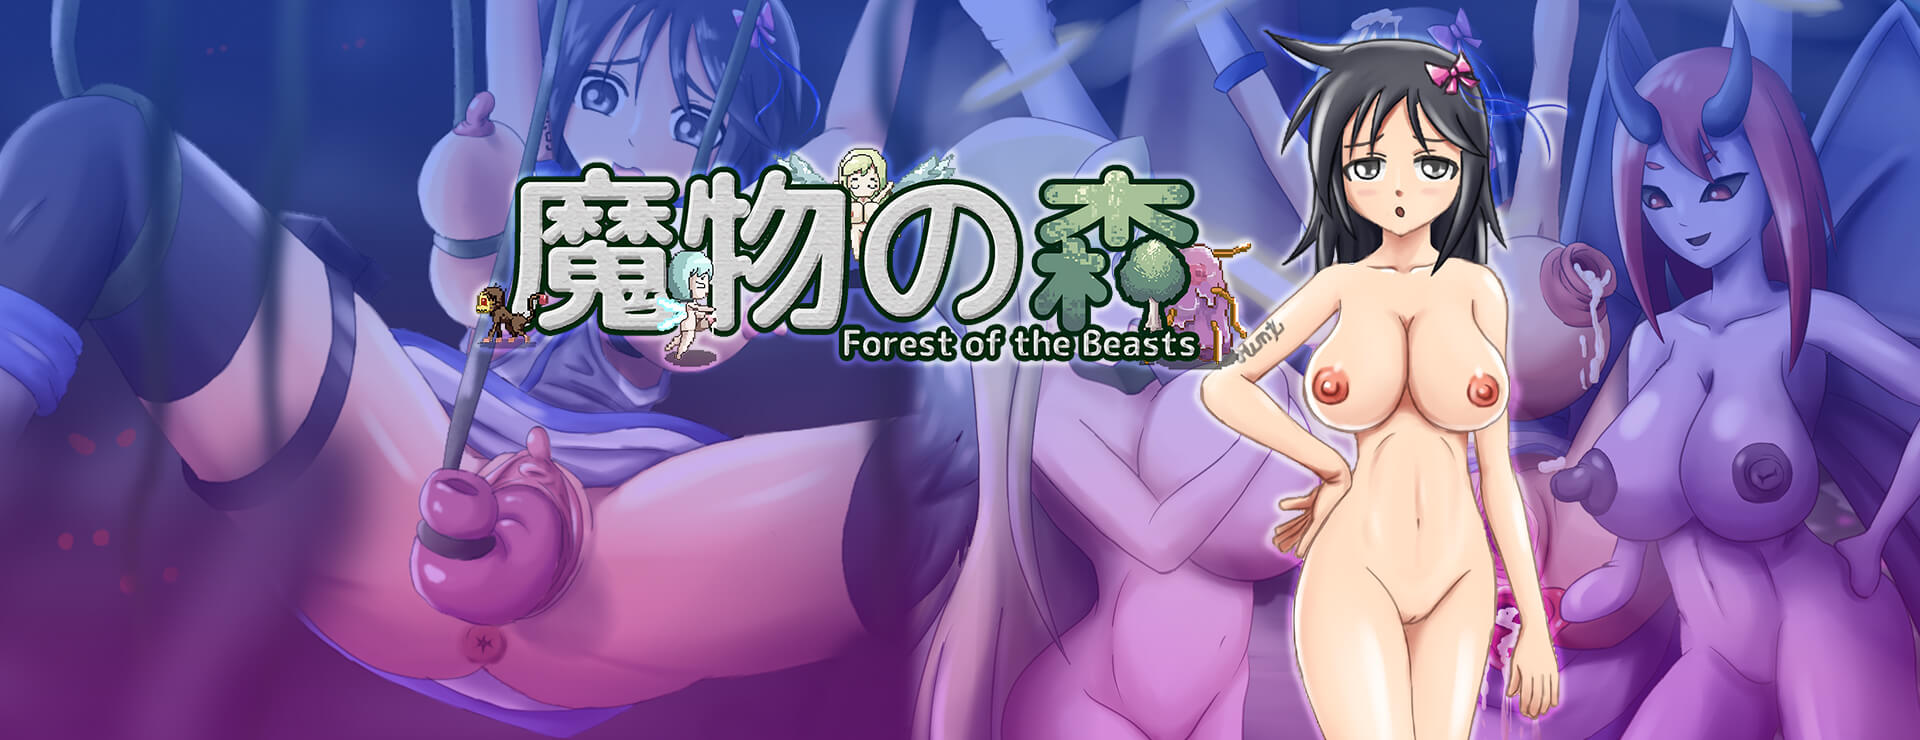 Forest of the Beasts - Action Adventure Game